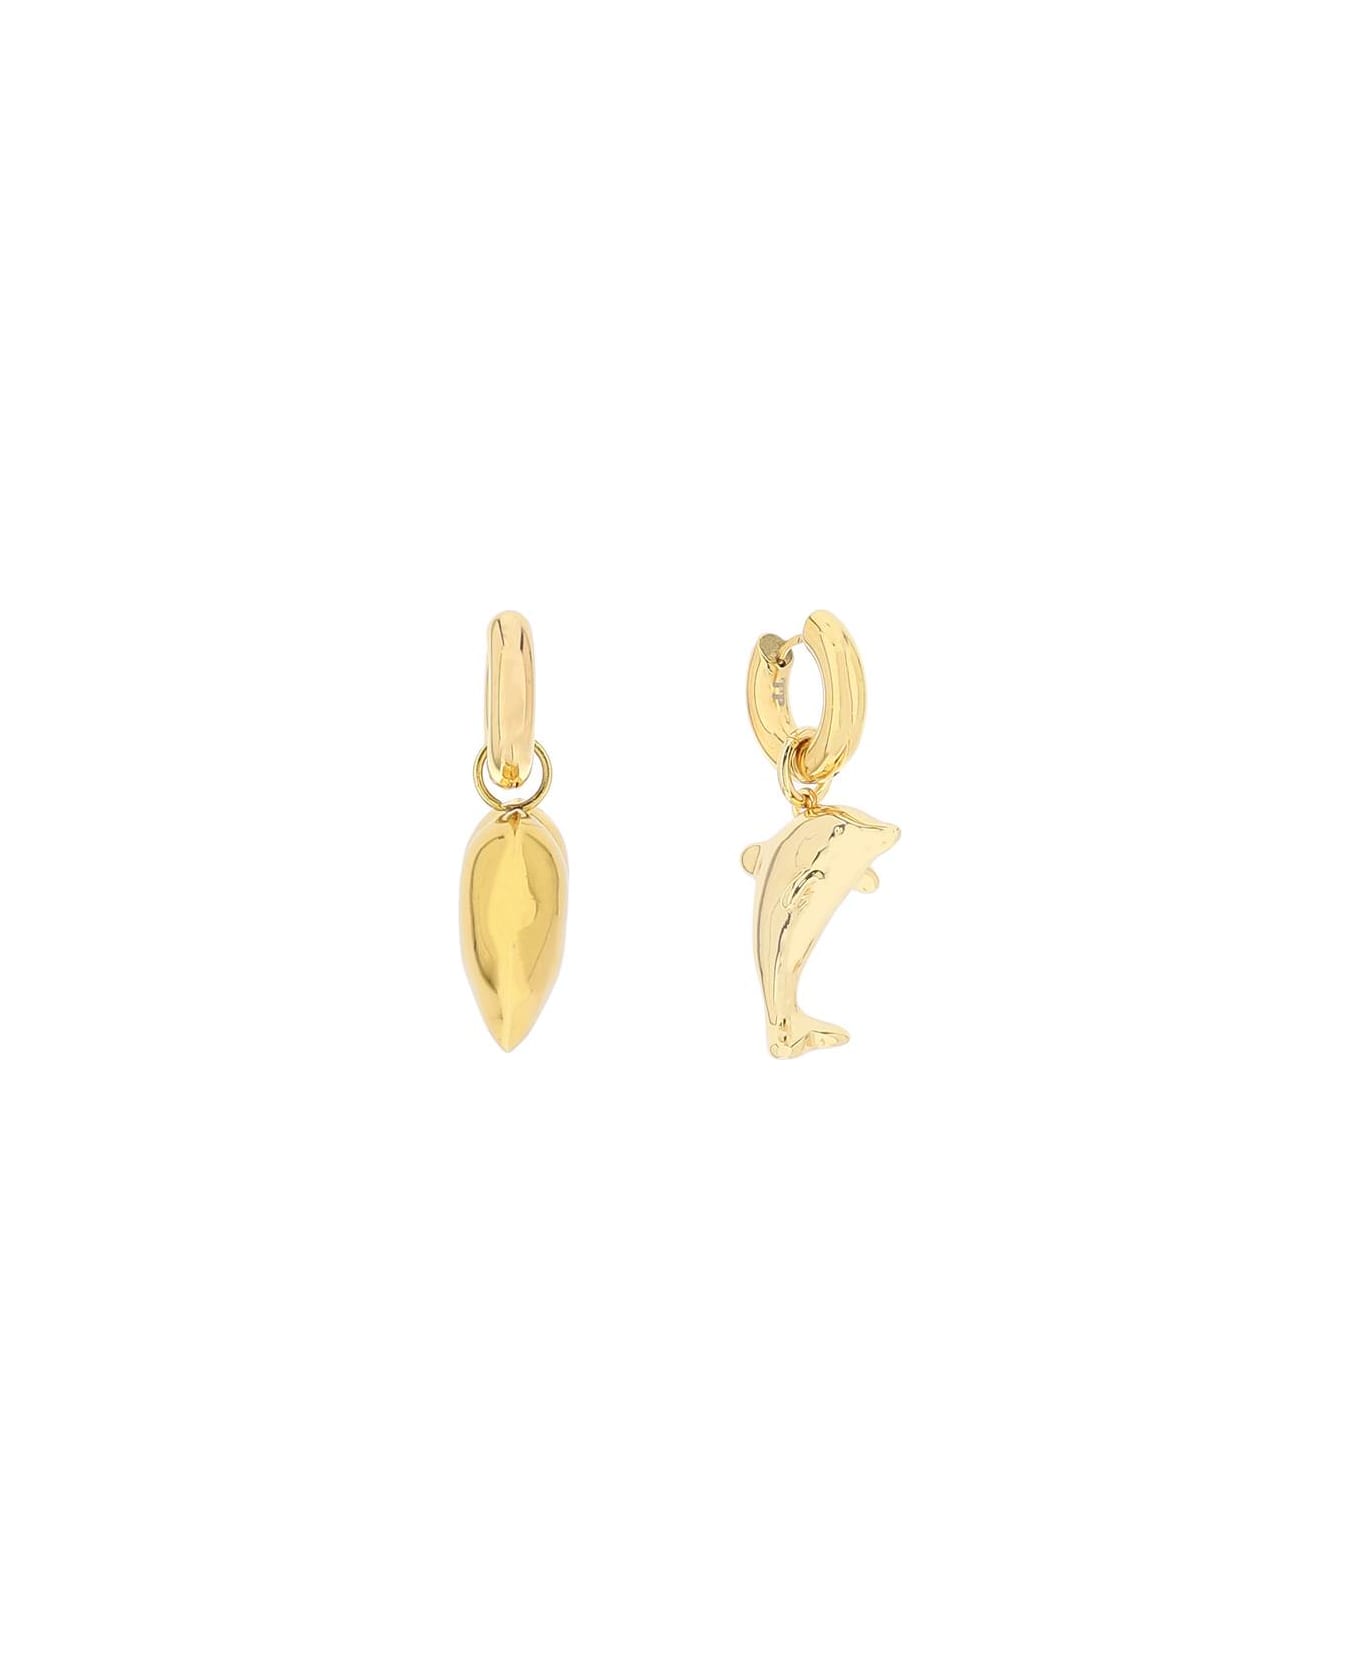 Timeless Pearly Earrings With Charms - GOLD (Gold) イヤリング